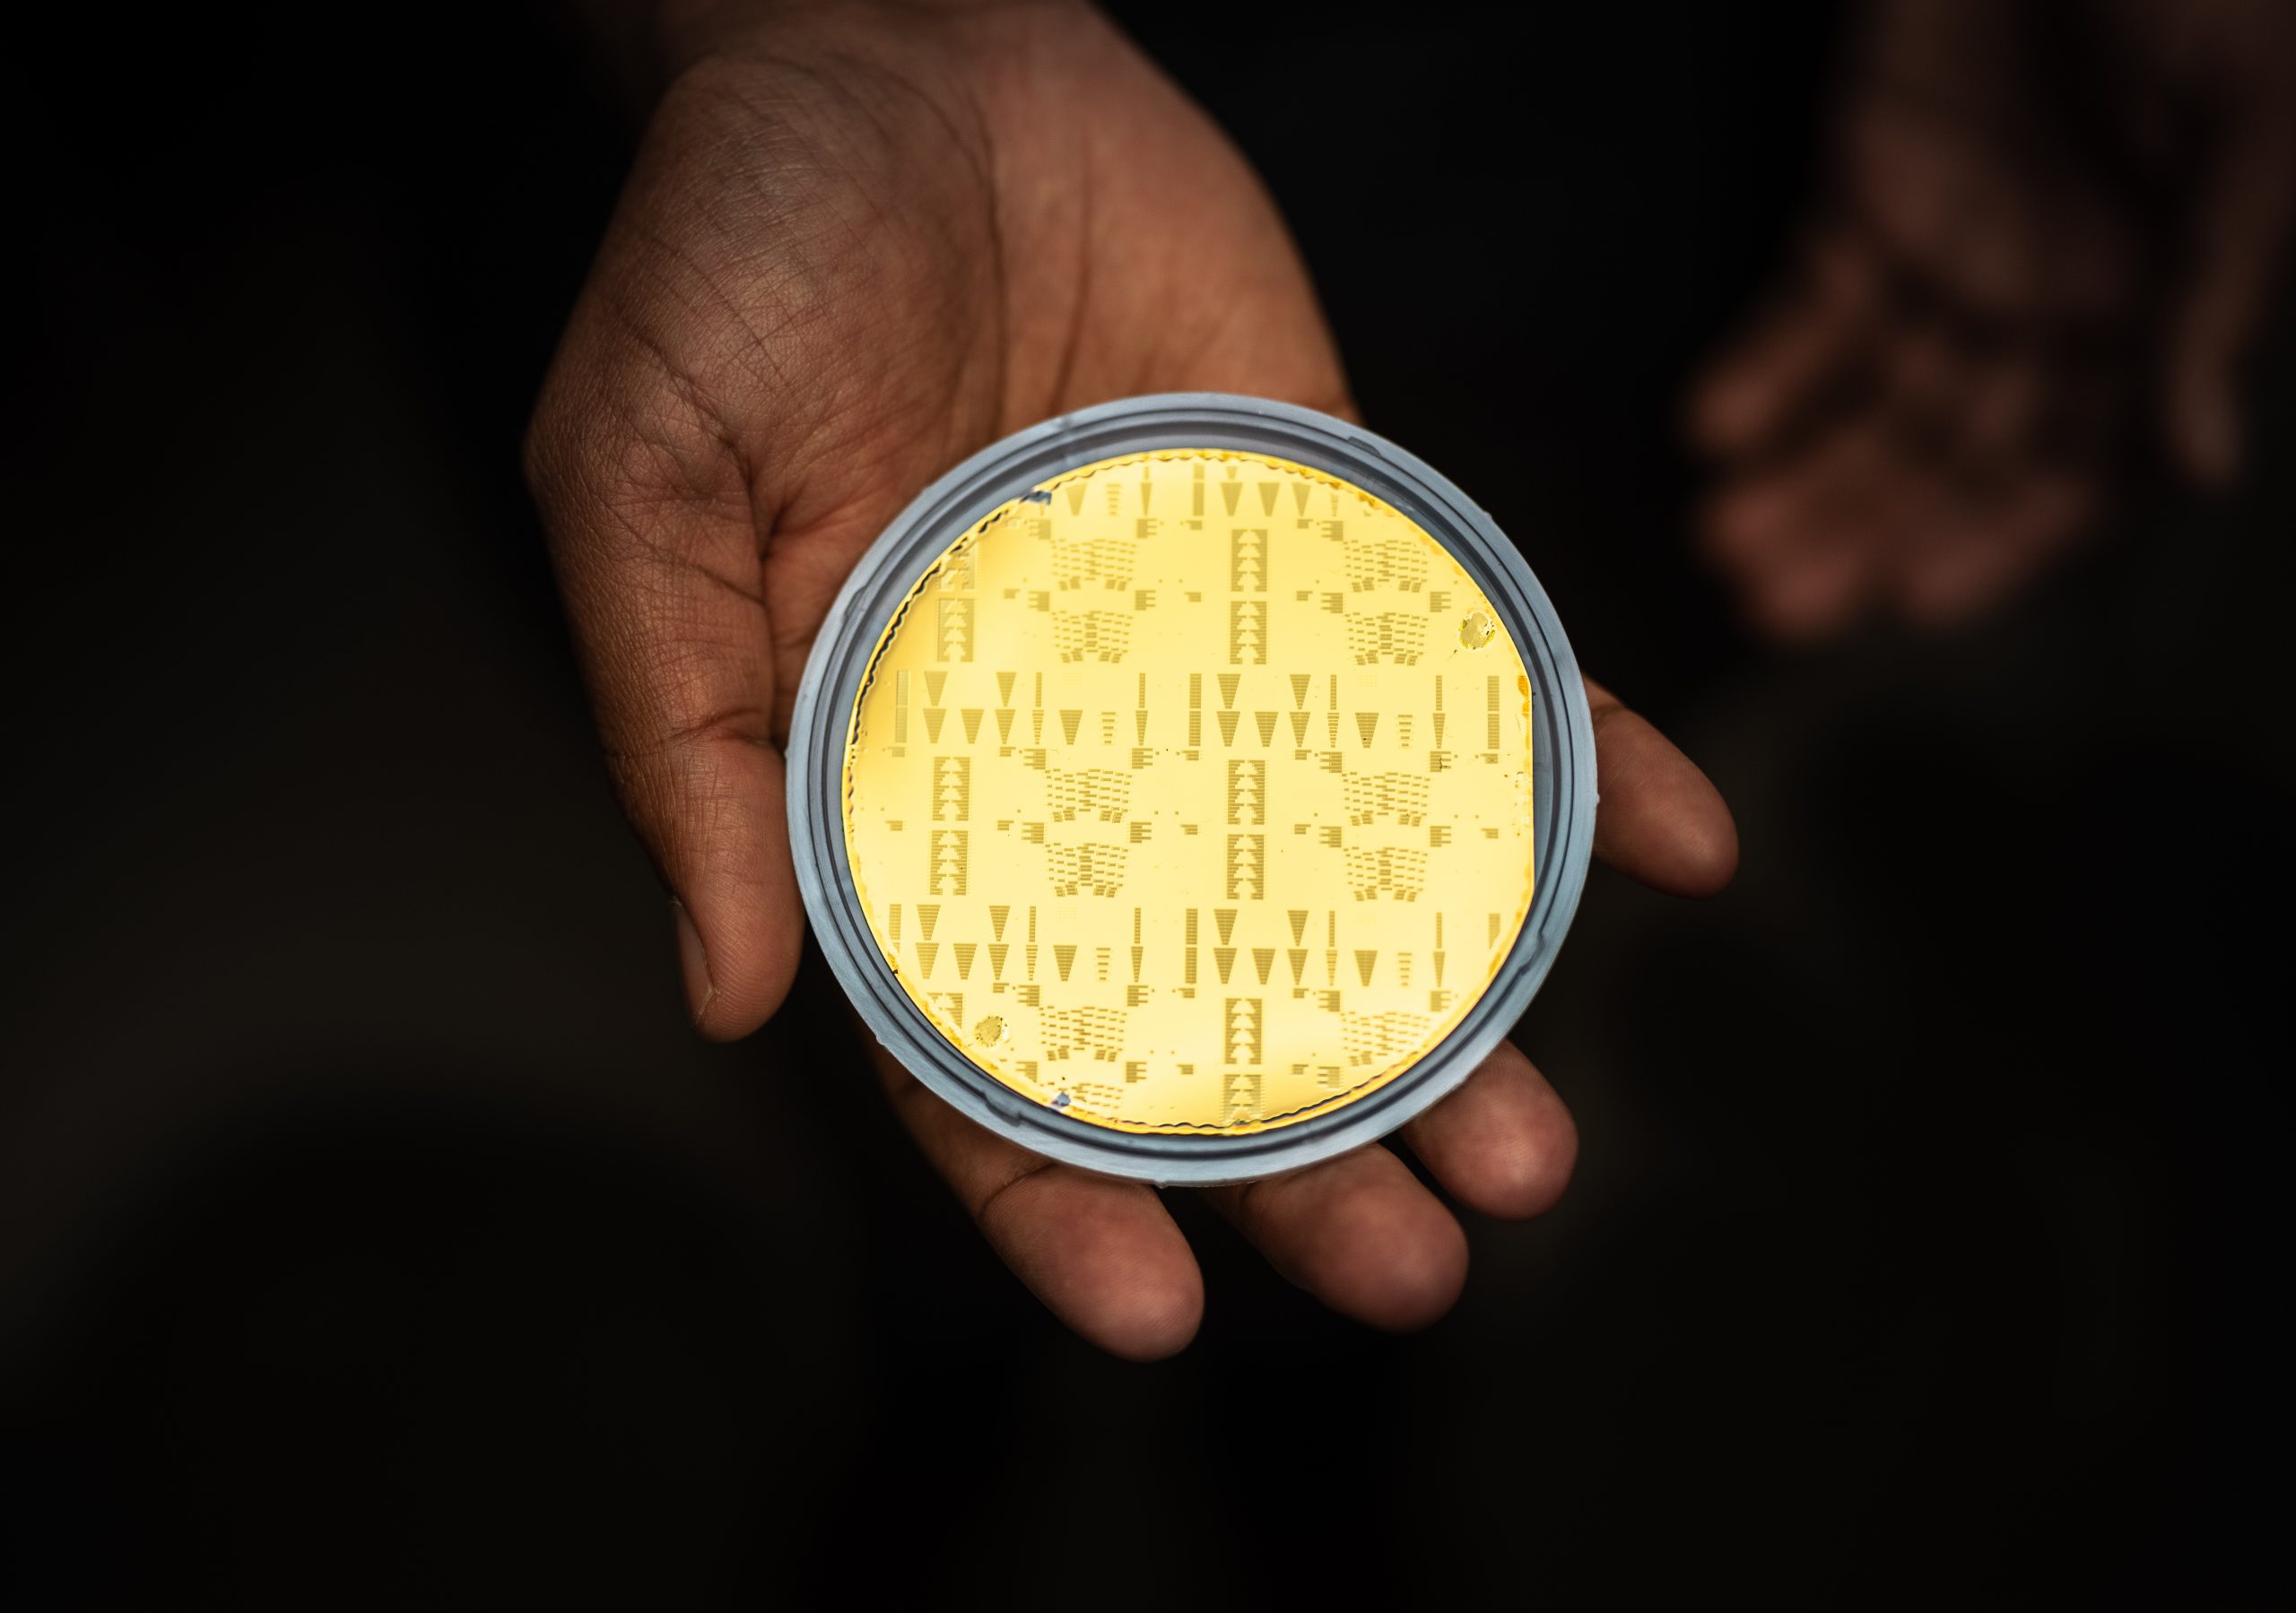 Ashok Kodigala holds a gold plated wafer filled with thousands of minute lasers made at Sandia National Laboratories MESA facility.